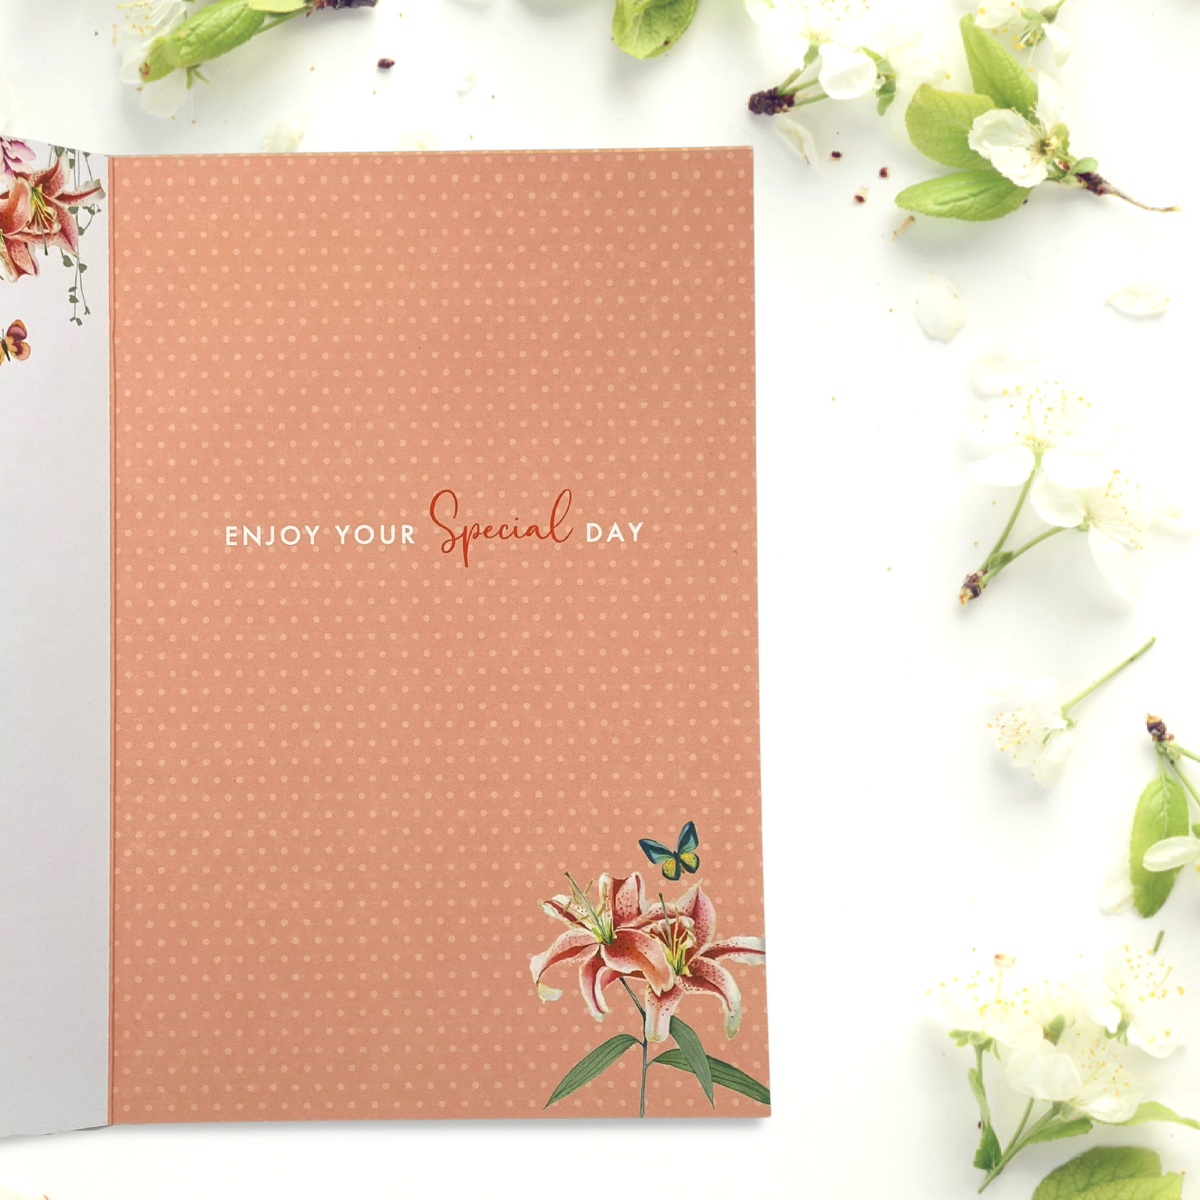 Inside card image with orange background, floral graphics and text